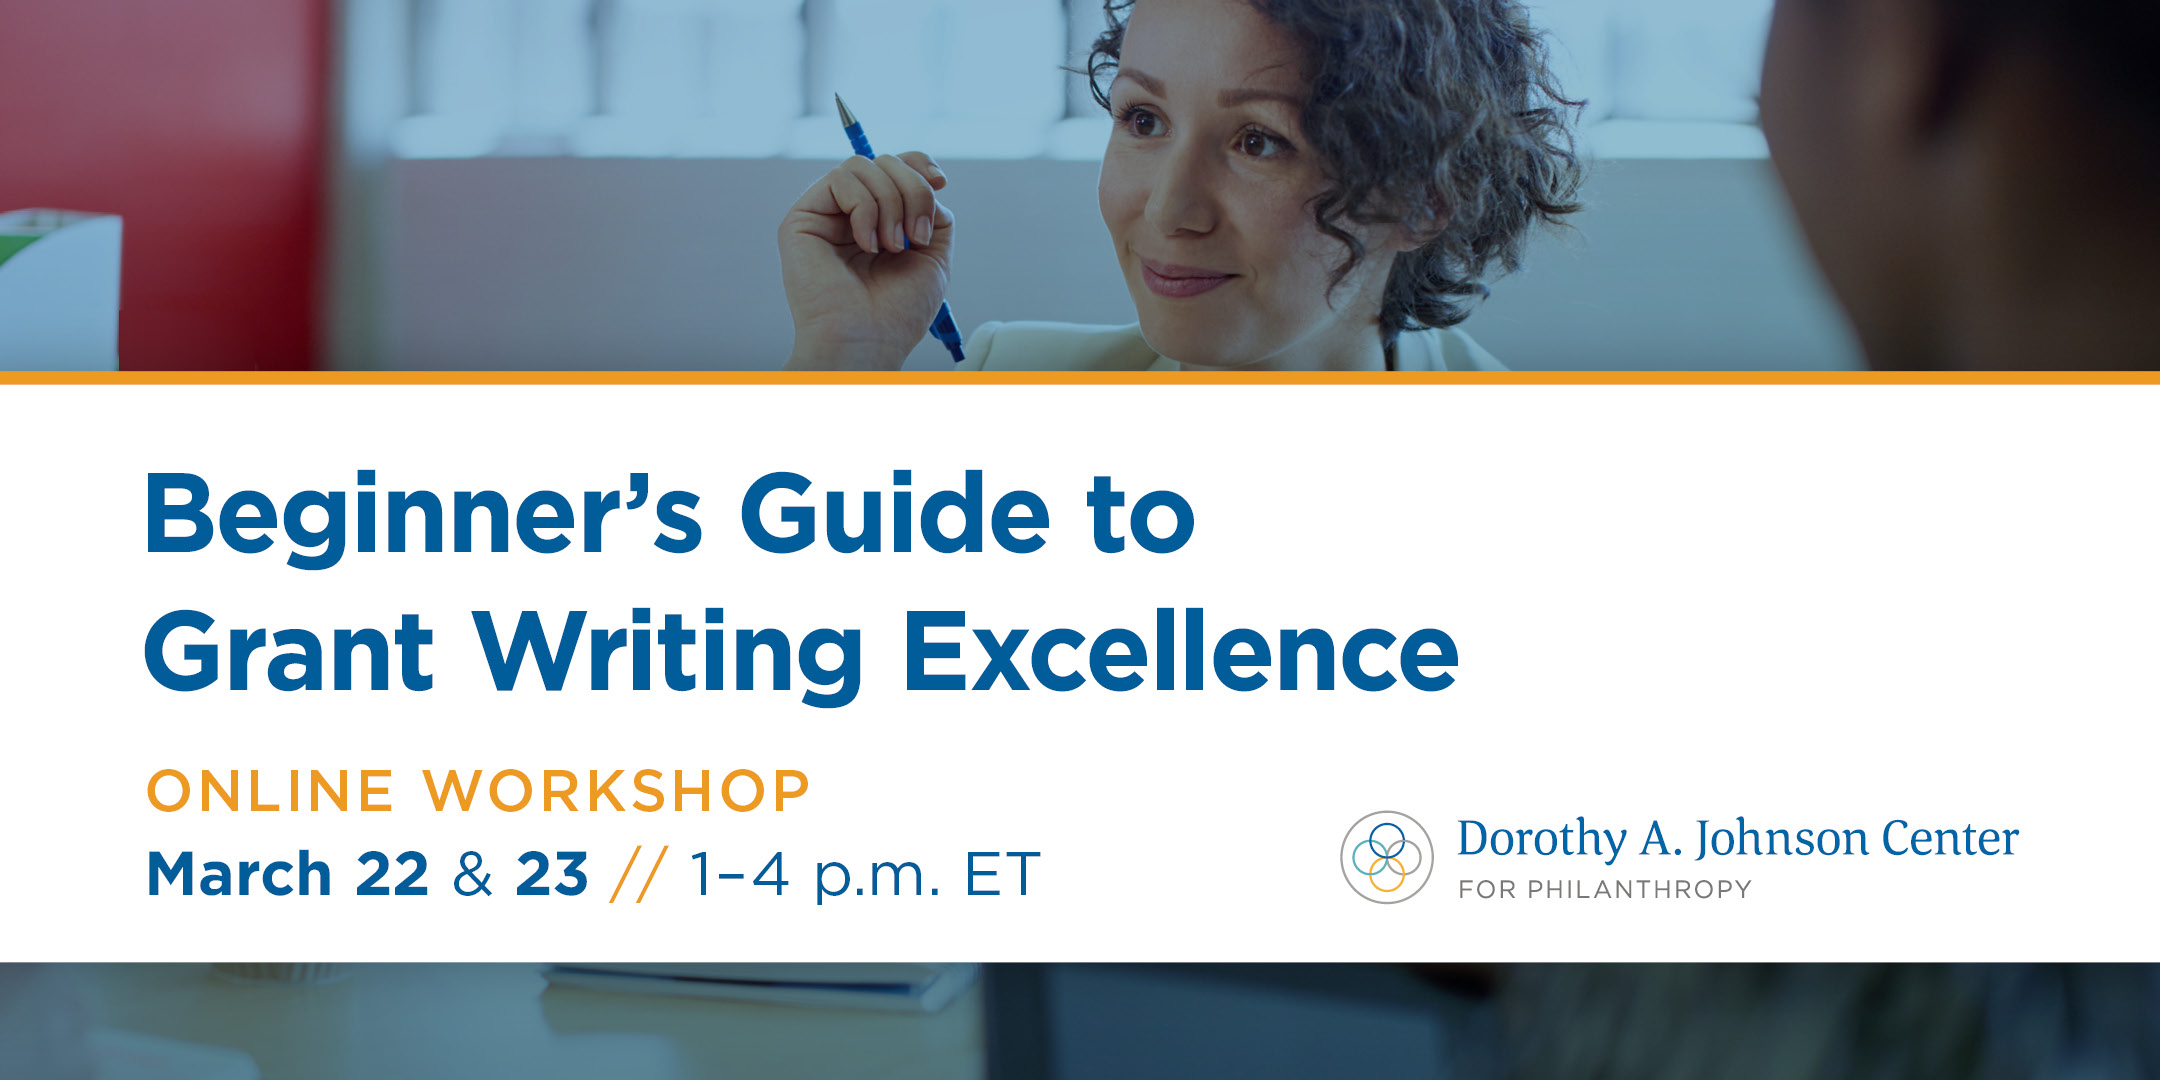 Beginner’s Guide to Grant Writing Excellence